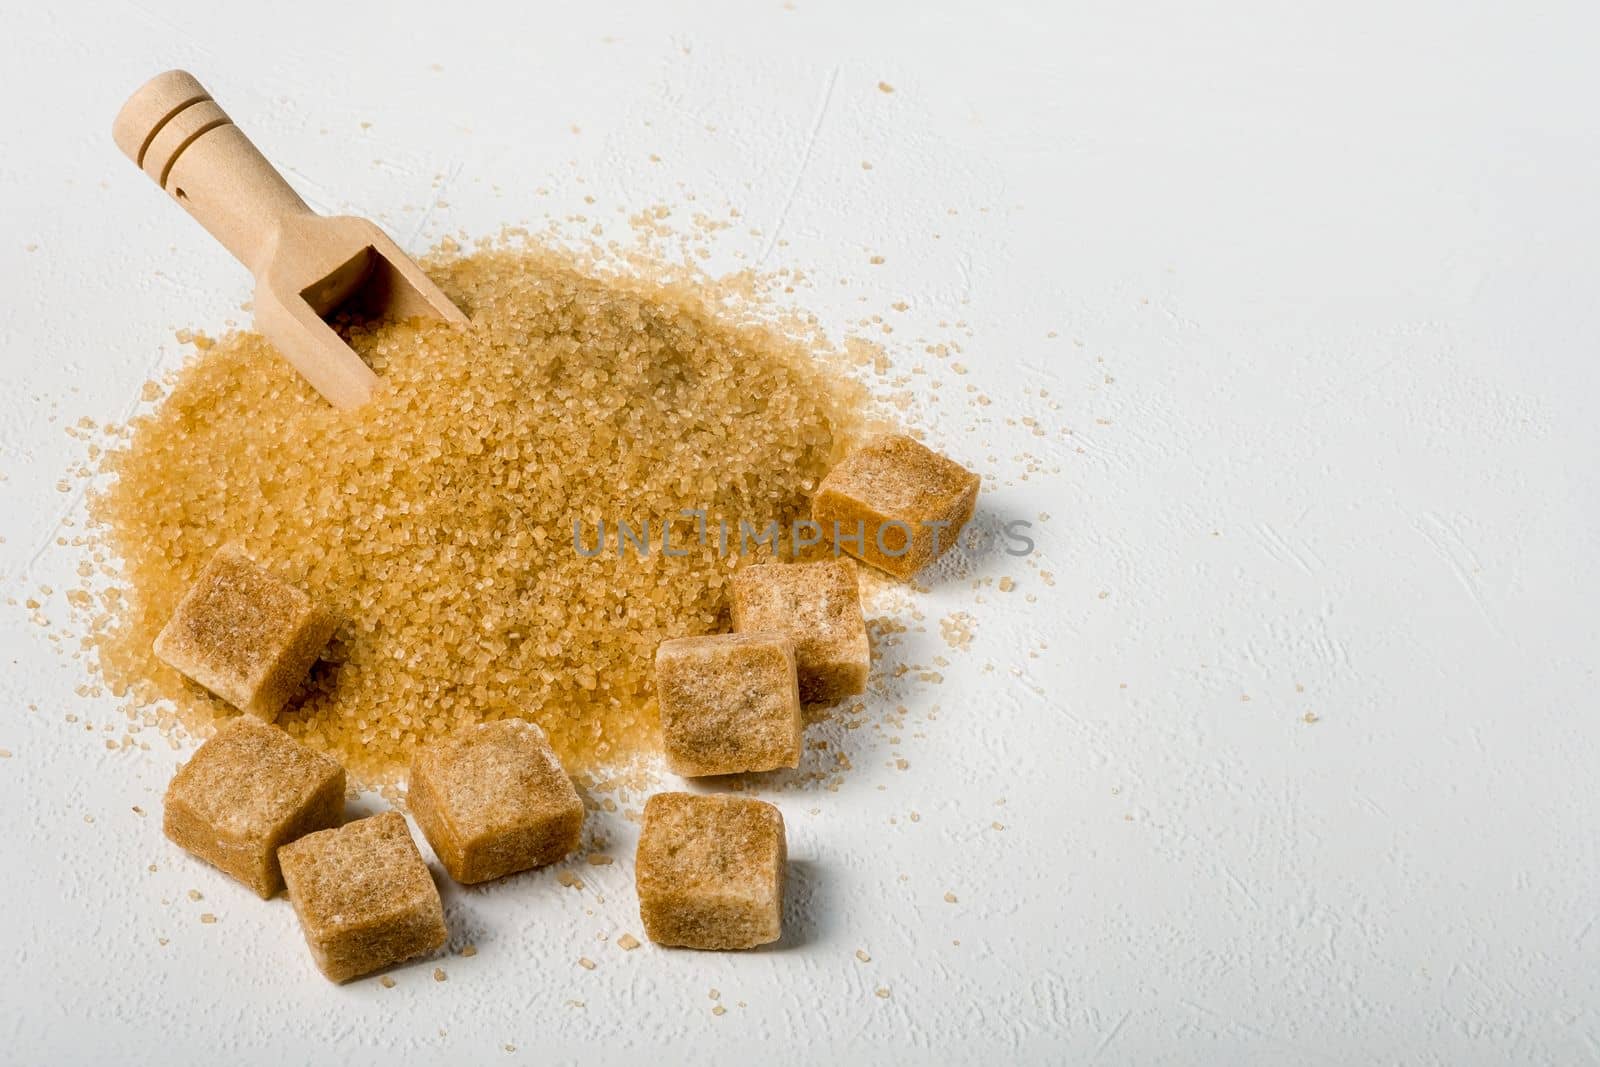 Brown cane sugar is also sprinkled in lumps on a light surface. Wooden scoop for bulk products. Selective focus. Space for text.